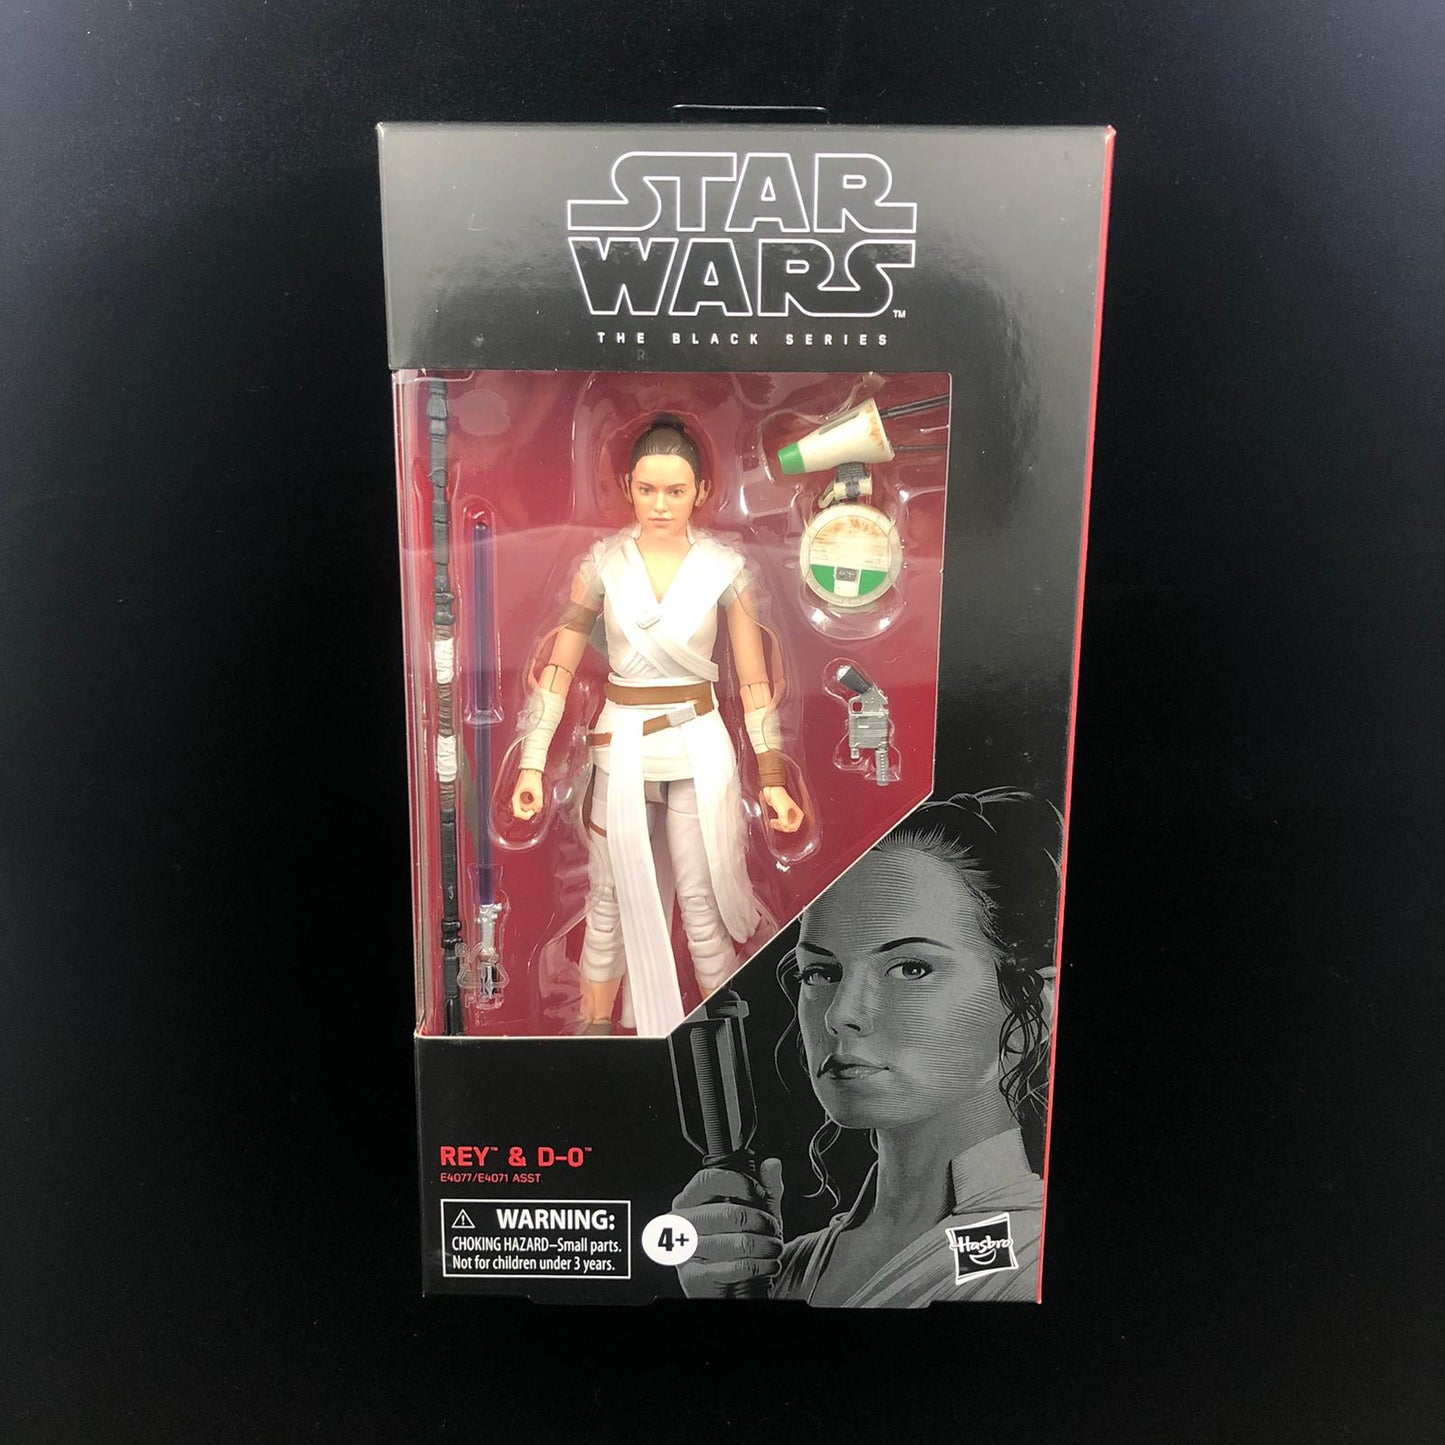 Star Wars The Black Series Rey and D-O Figures